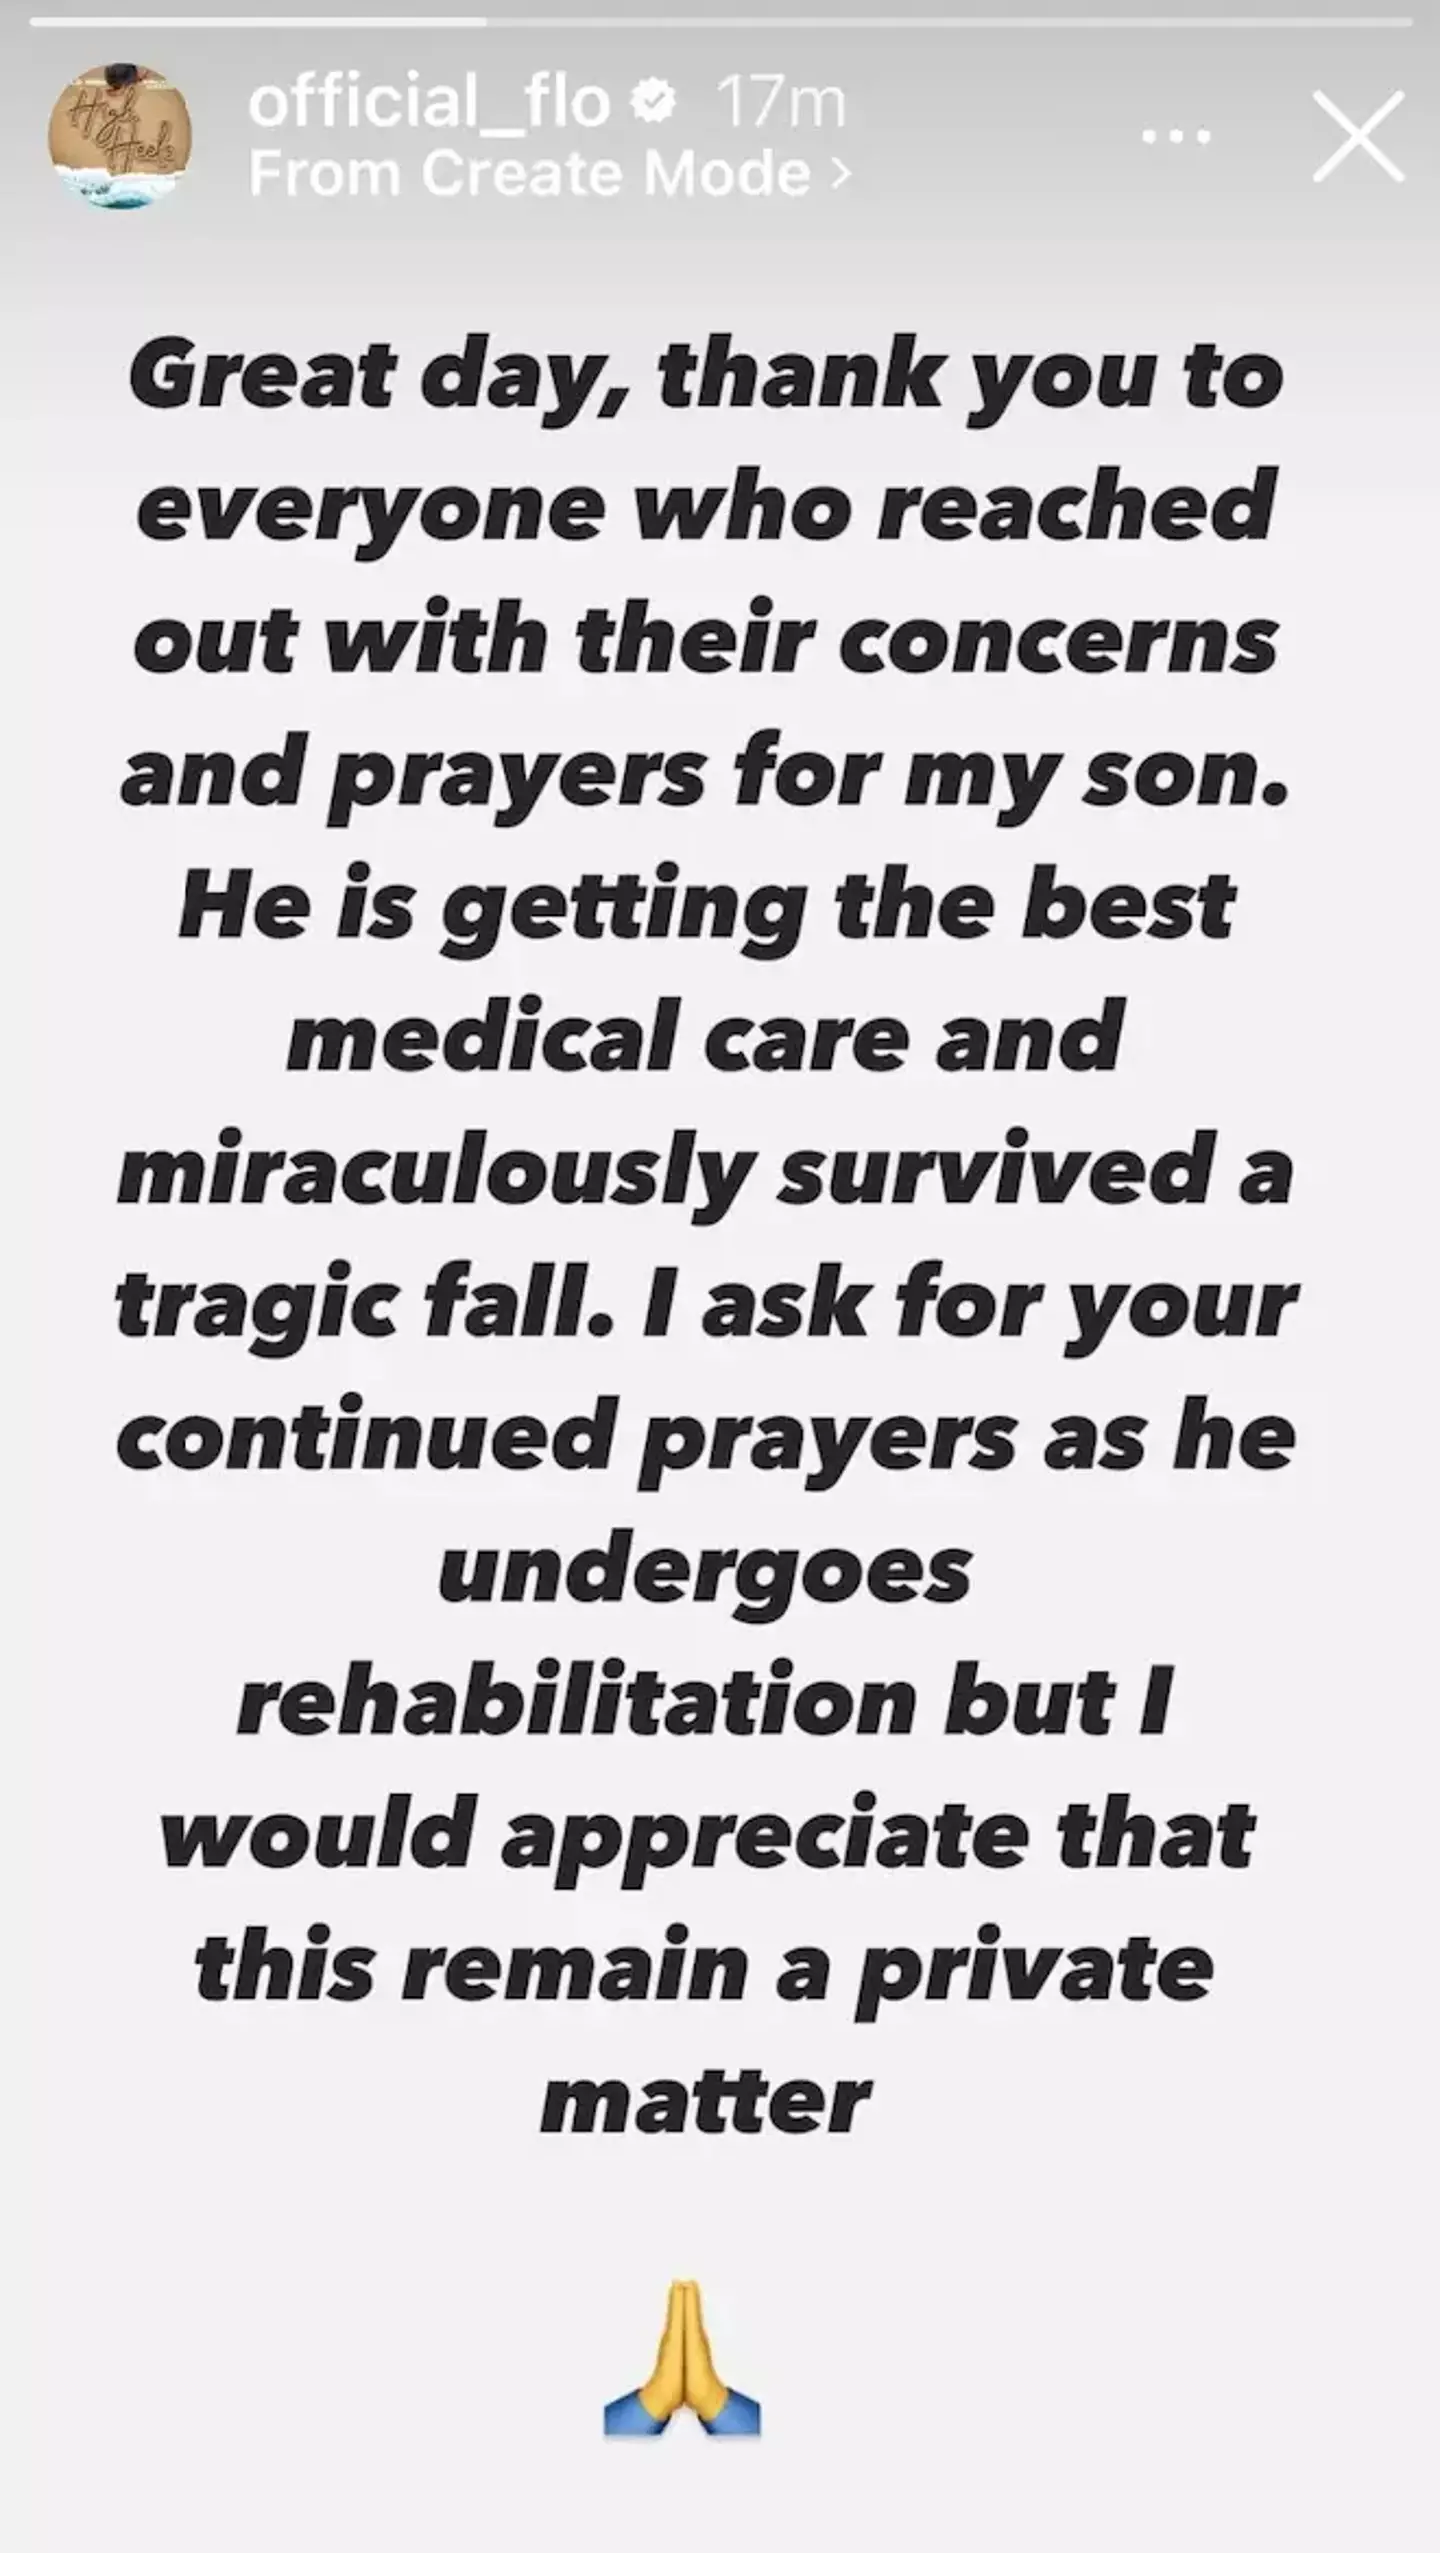 "I ask for your continued prayers as he undergoes rehabilitation."